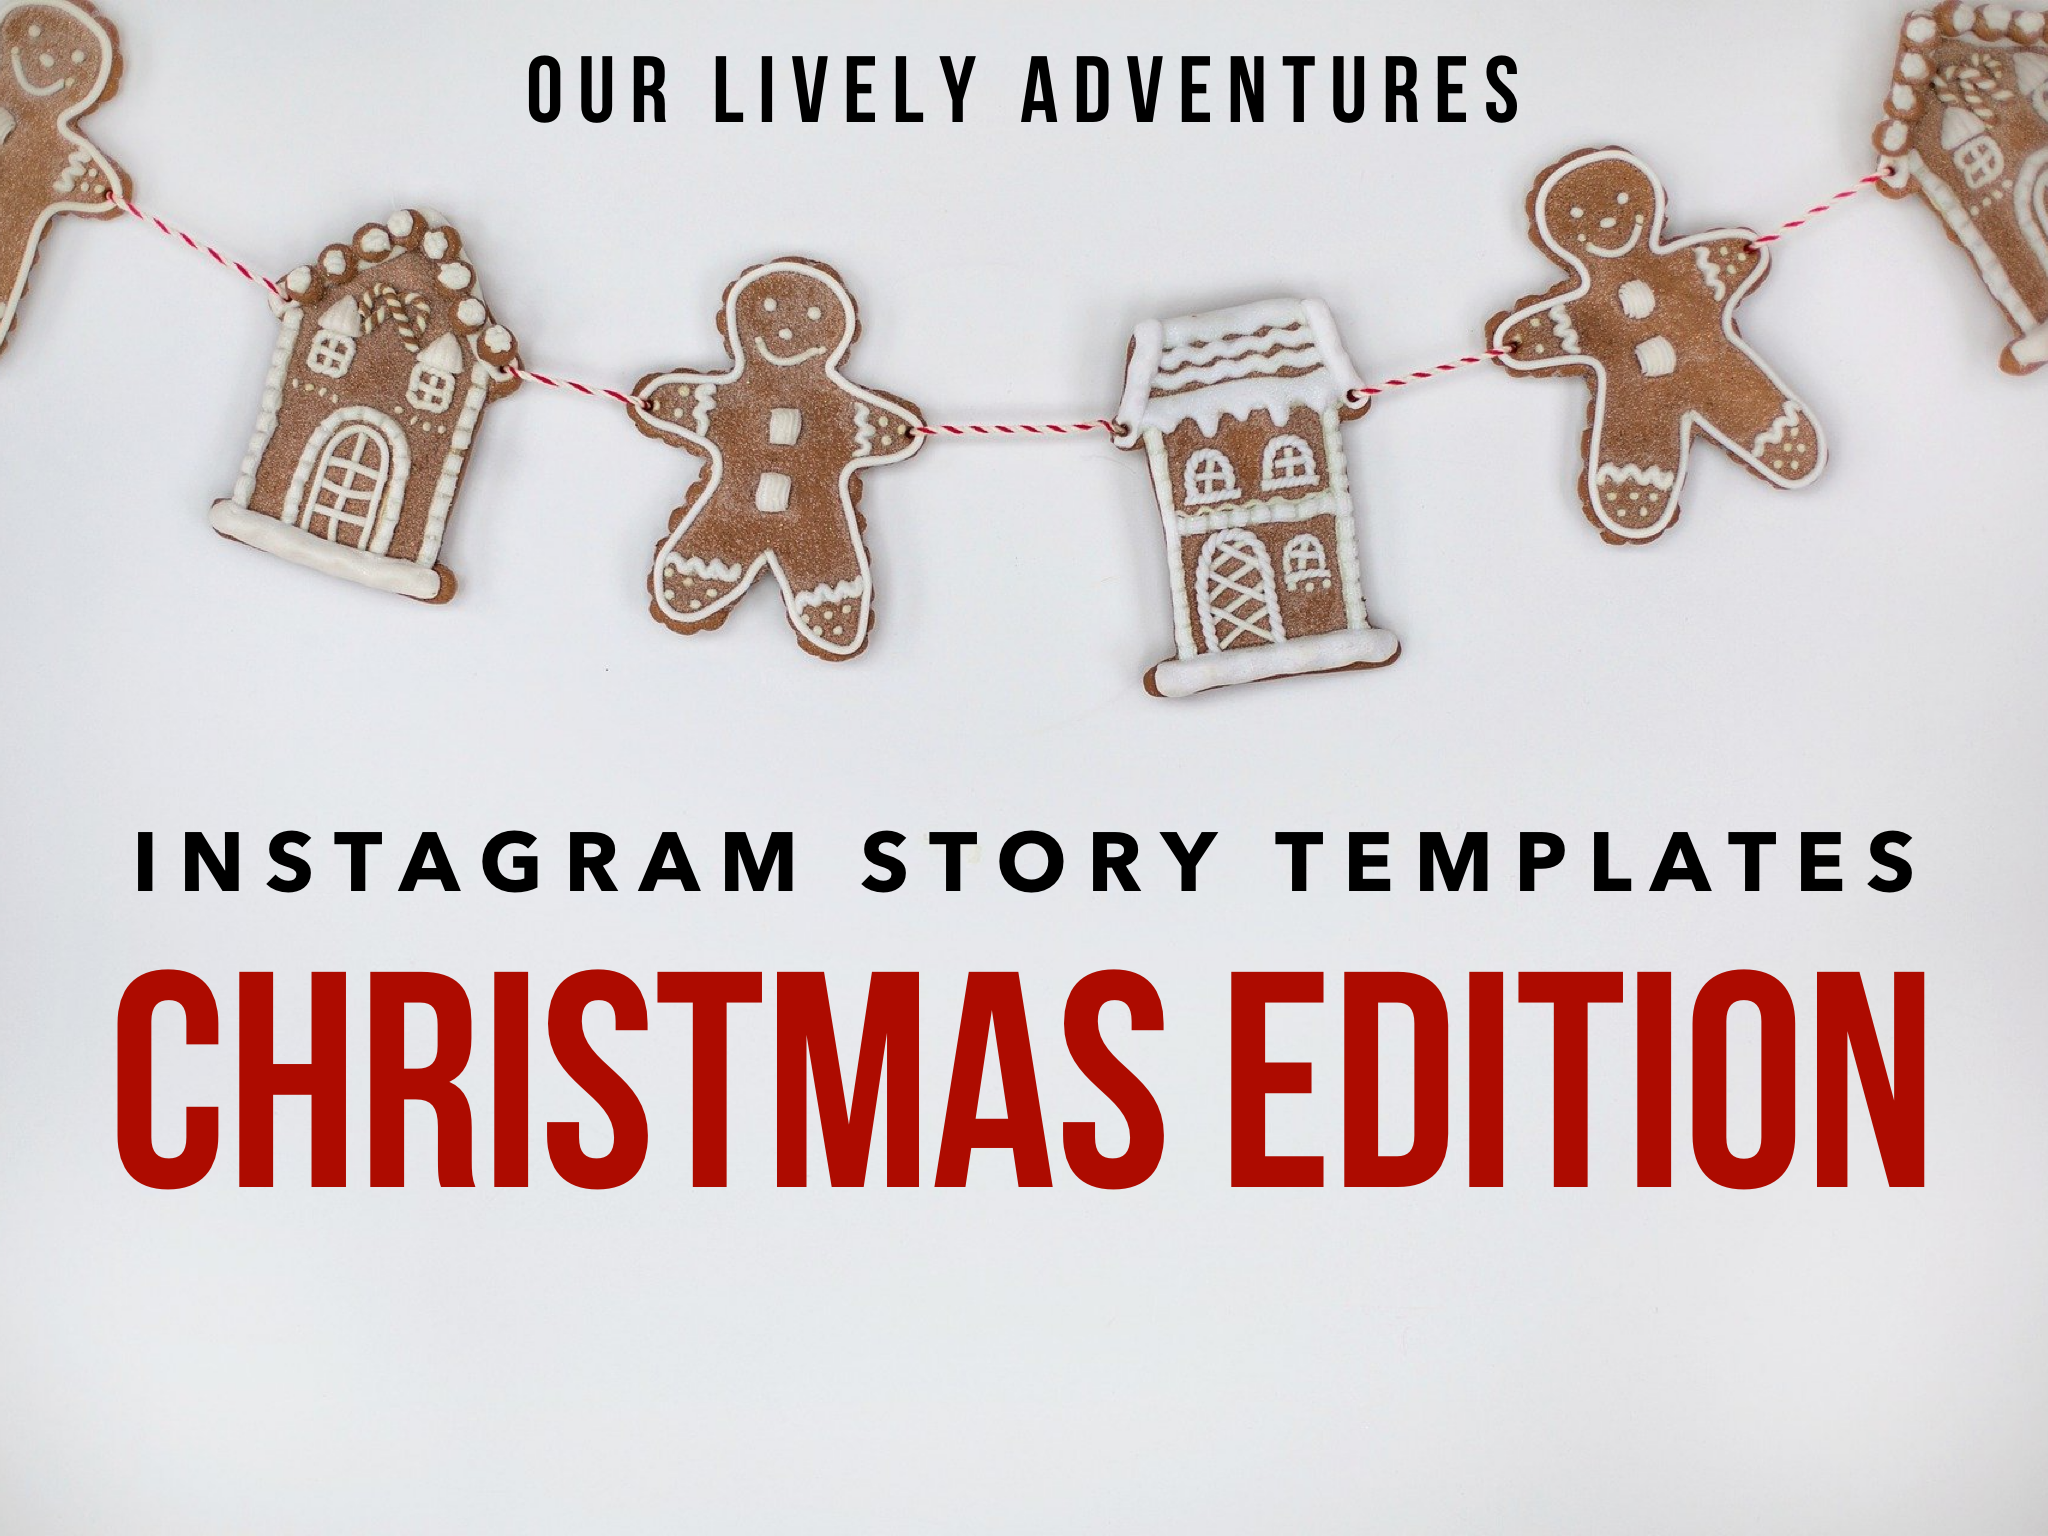 Instagram Story Templates: Christmas Edition